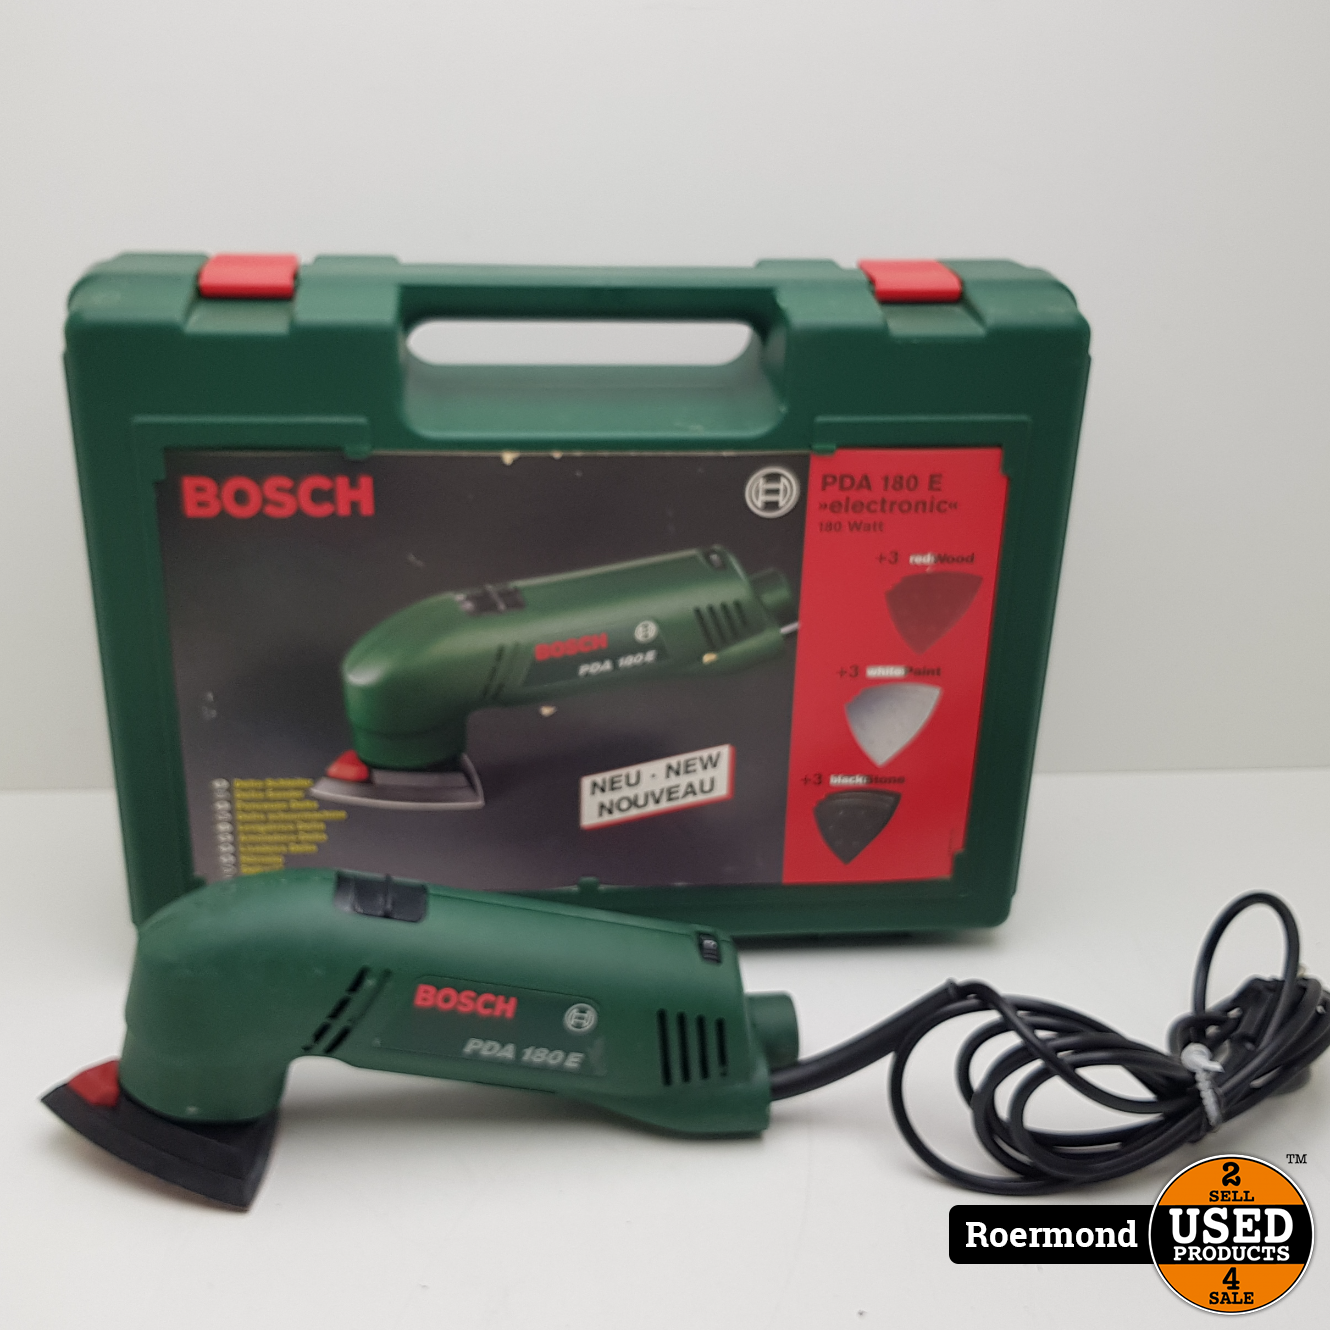 Kers Verwijdering cap Bosch PDA 180 E Schuurmachine I Zgan - Used Products Roermond